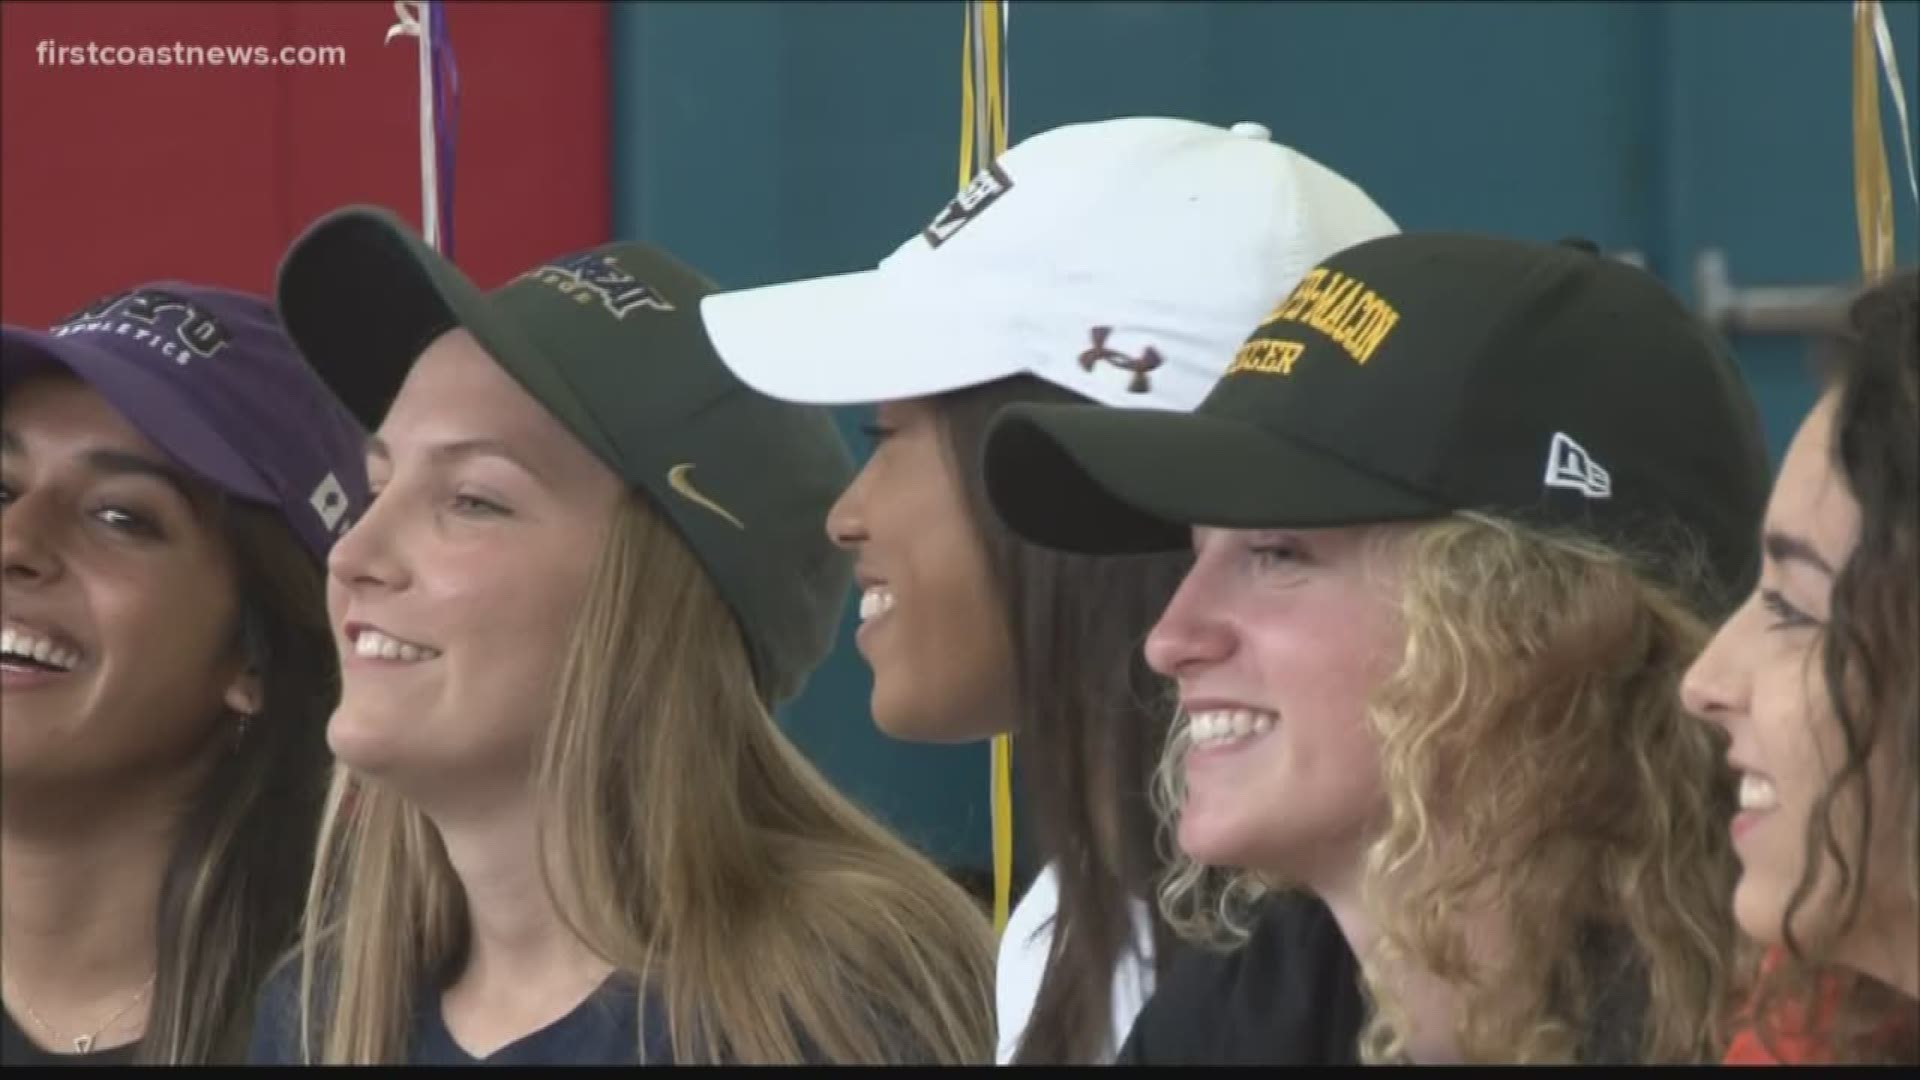 It's no secret that the First Coast is full of students with remarkable talent, which is why First Coast News is proud to present coverage of National Signing Day 20